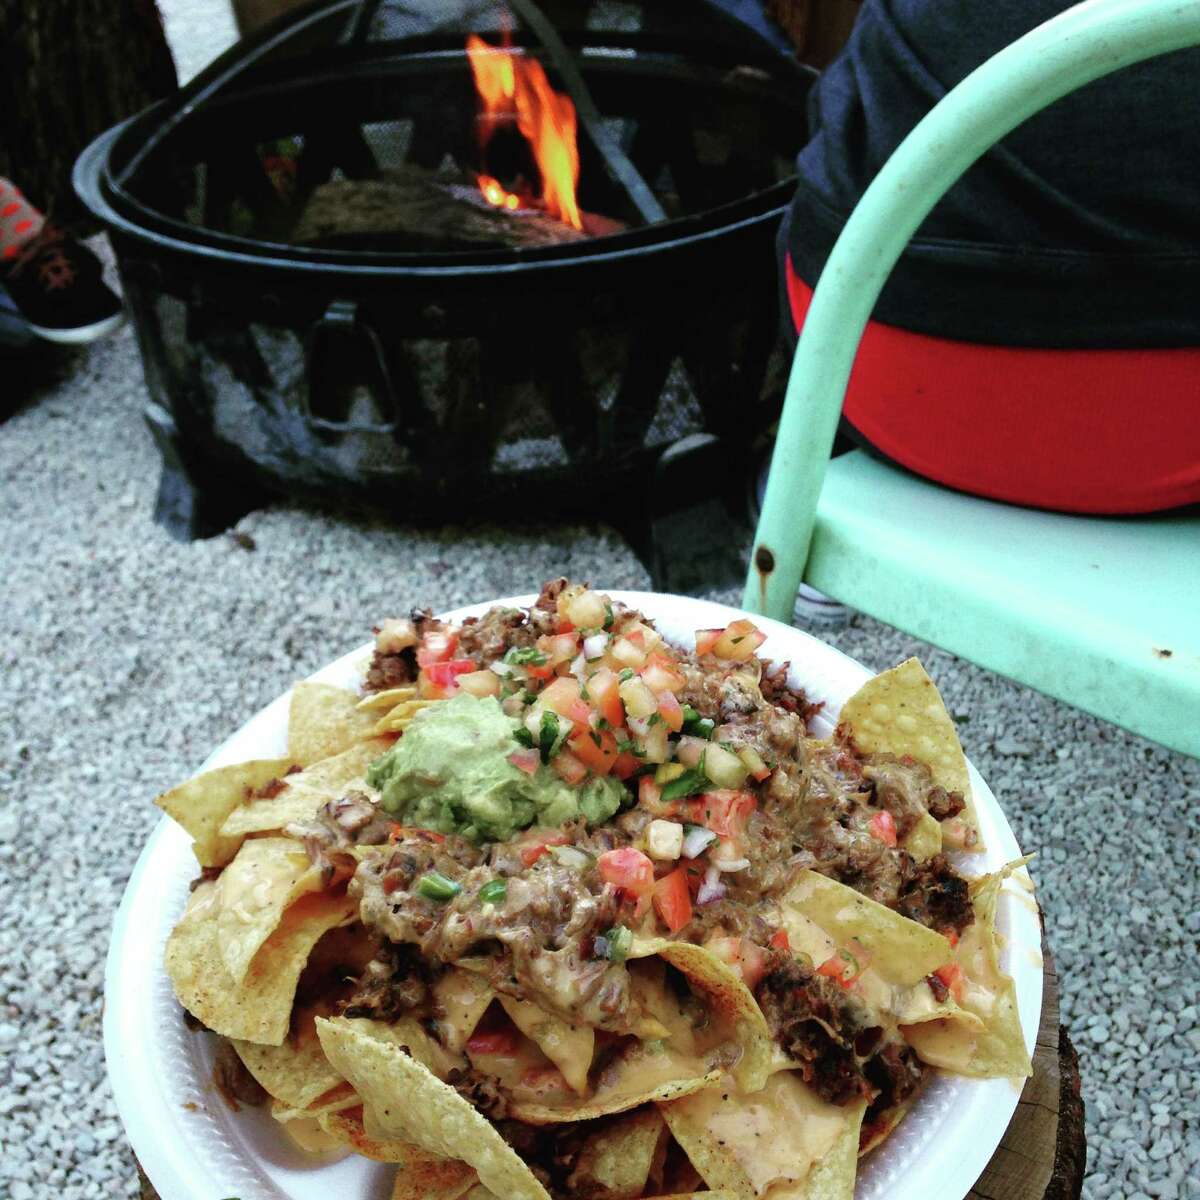 Brisket nachos from The Pigpen, 106 Pershing Ave.